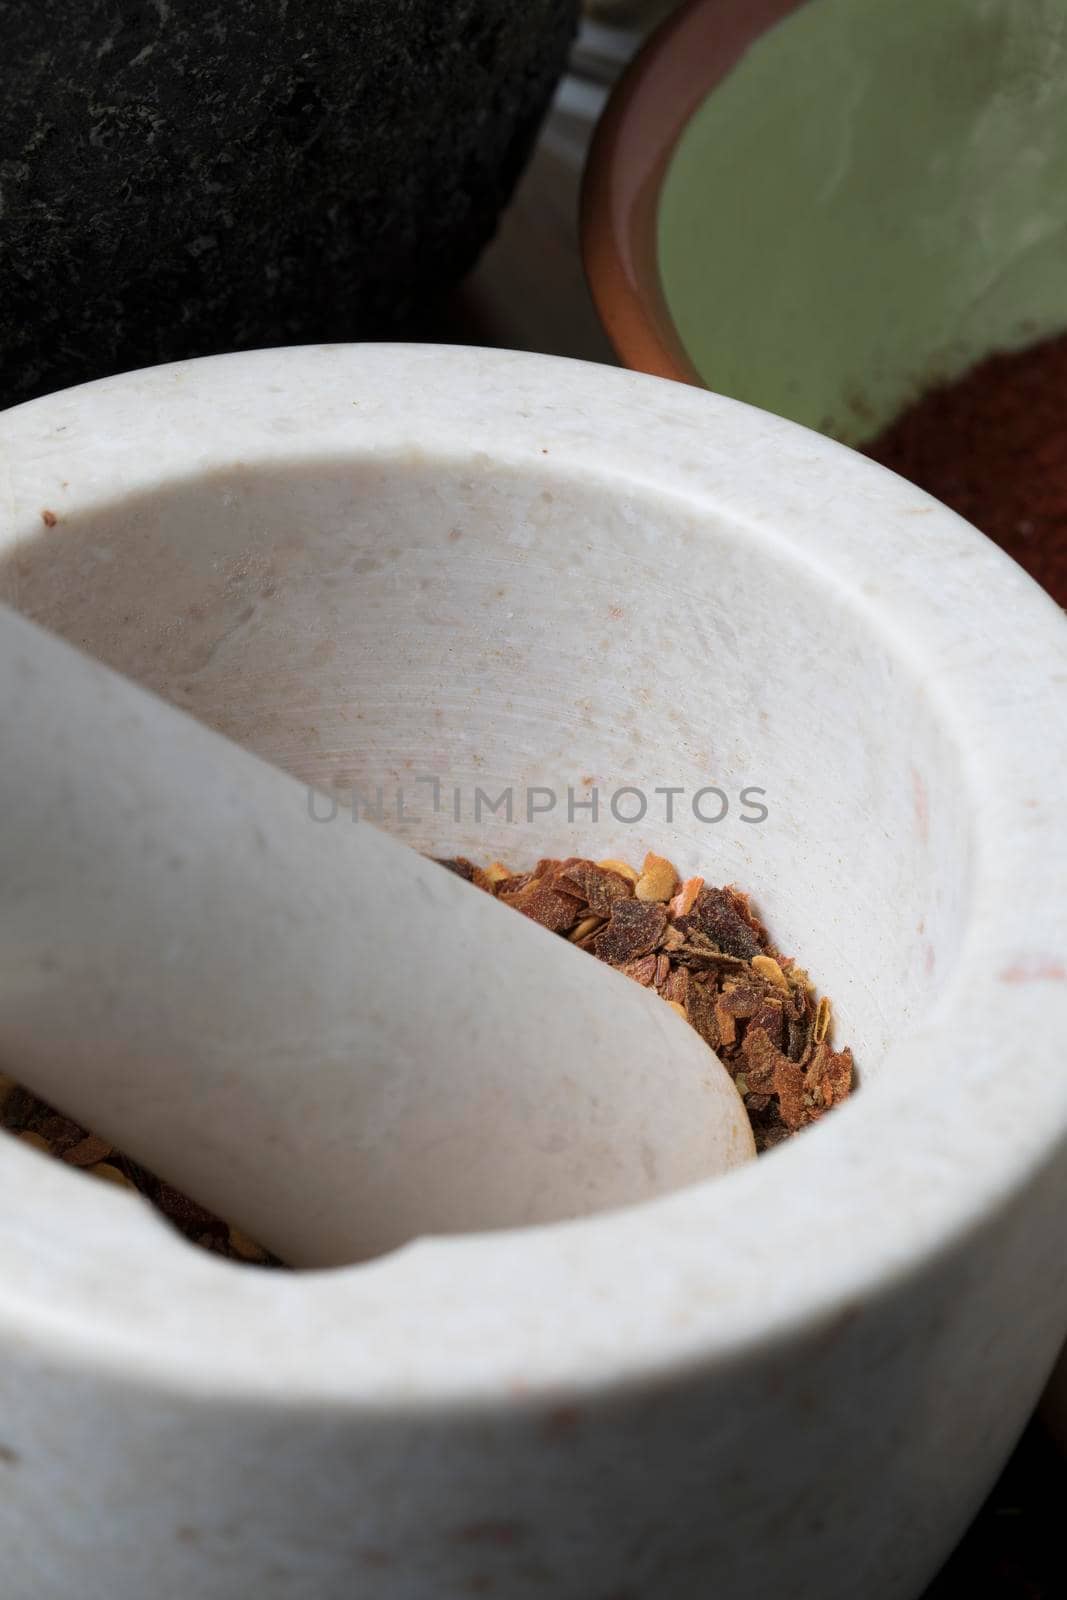 Vertical orientation close up of porcelain mortar and pestle with crushed dried chili pepper.